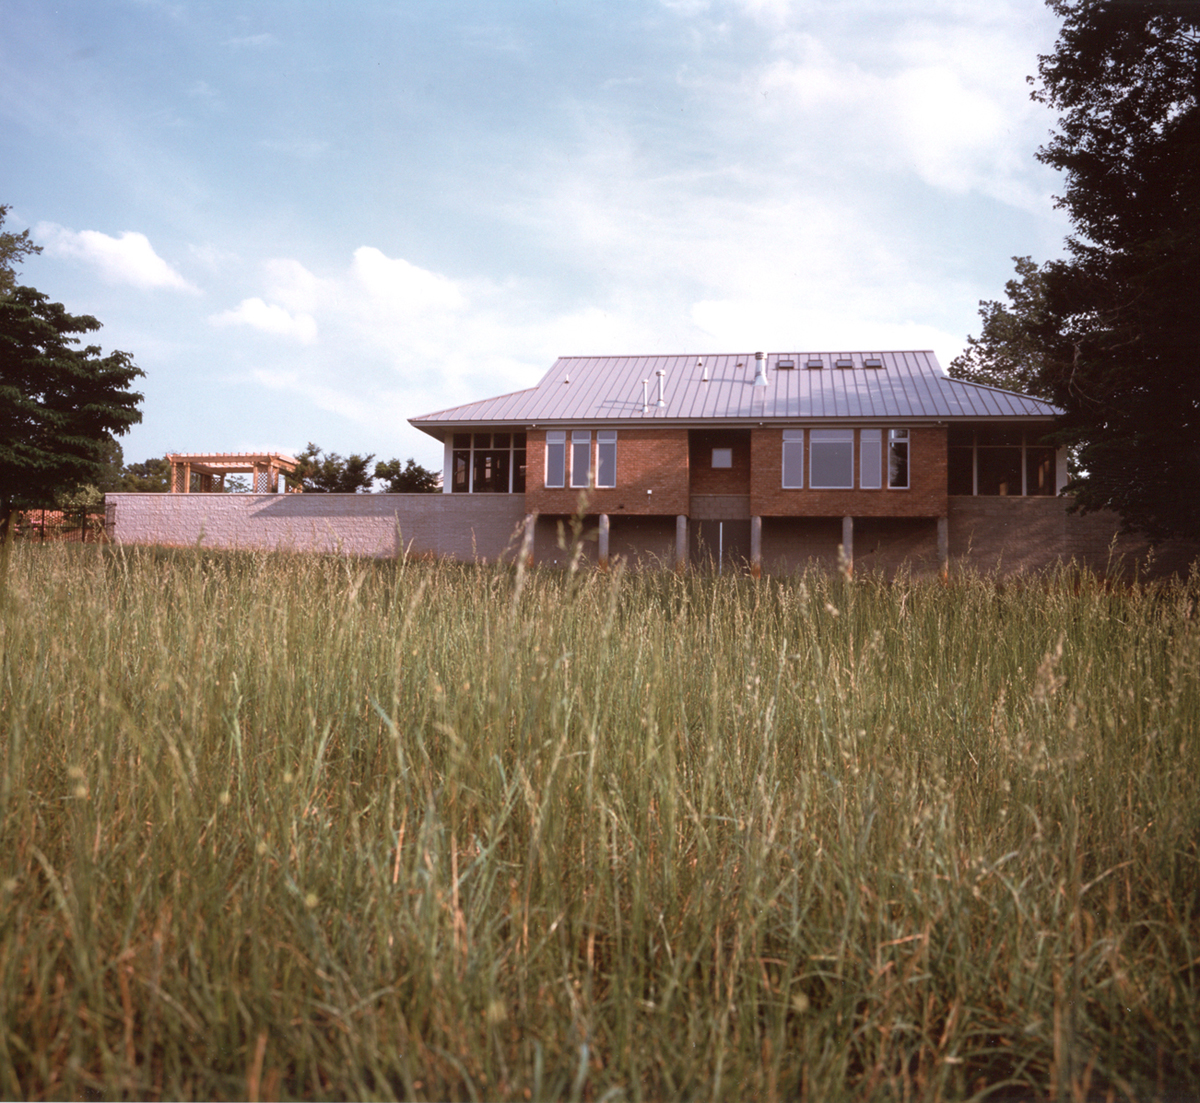 An exterior view of the house shows its grassy surrounding and unique roof form.